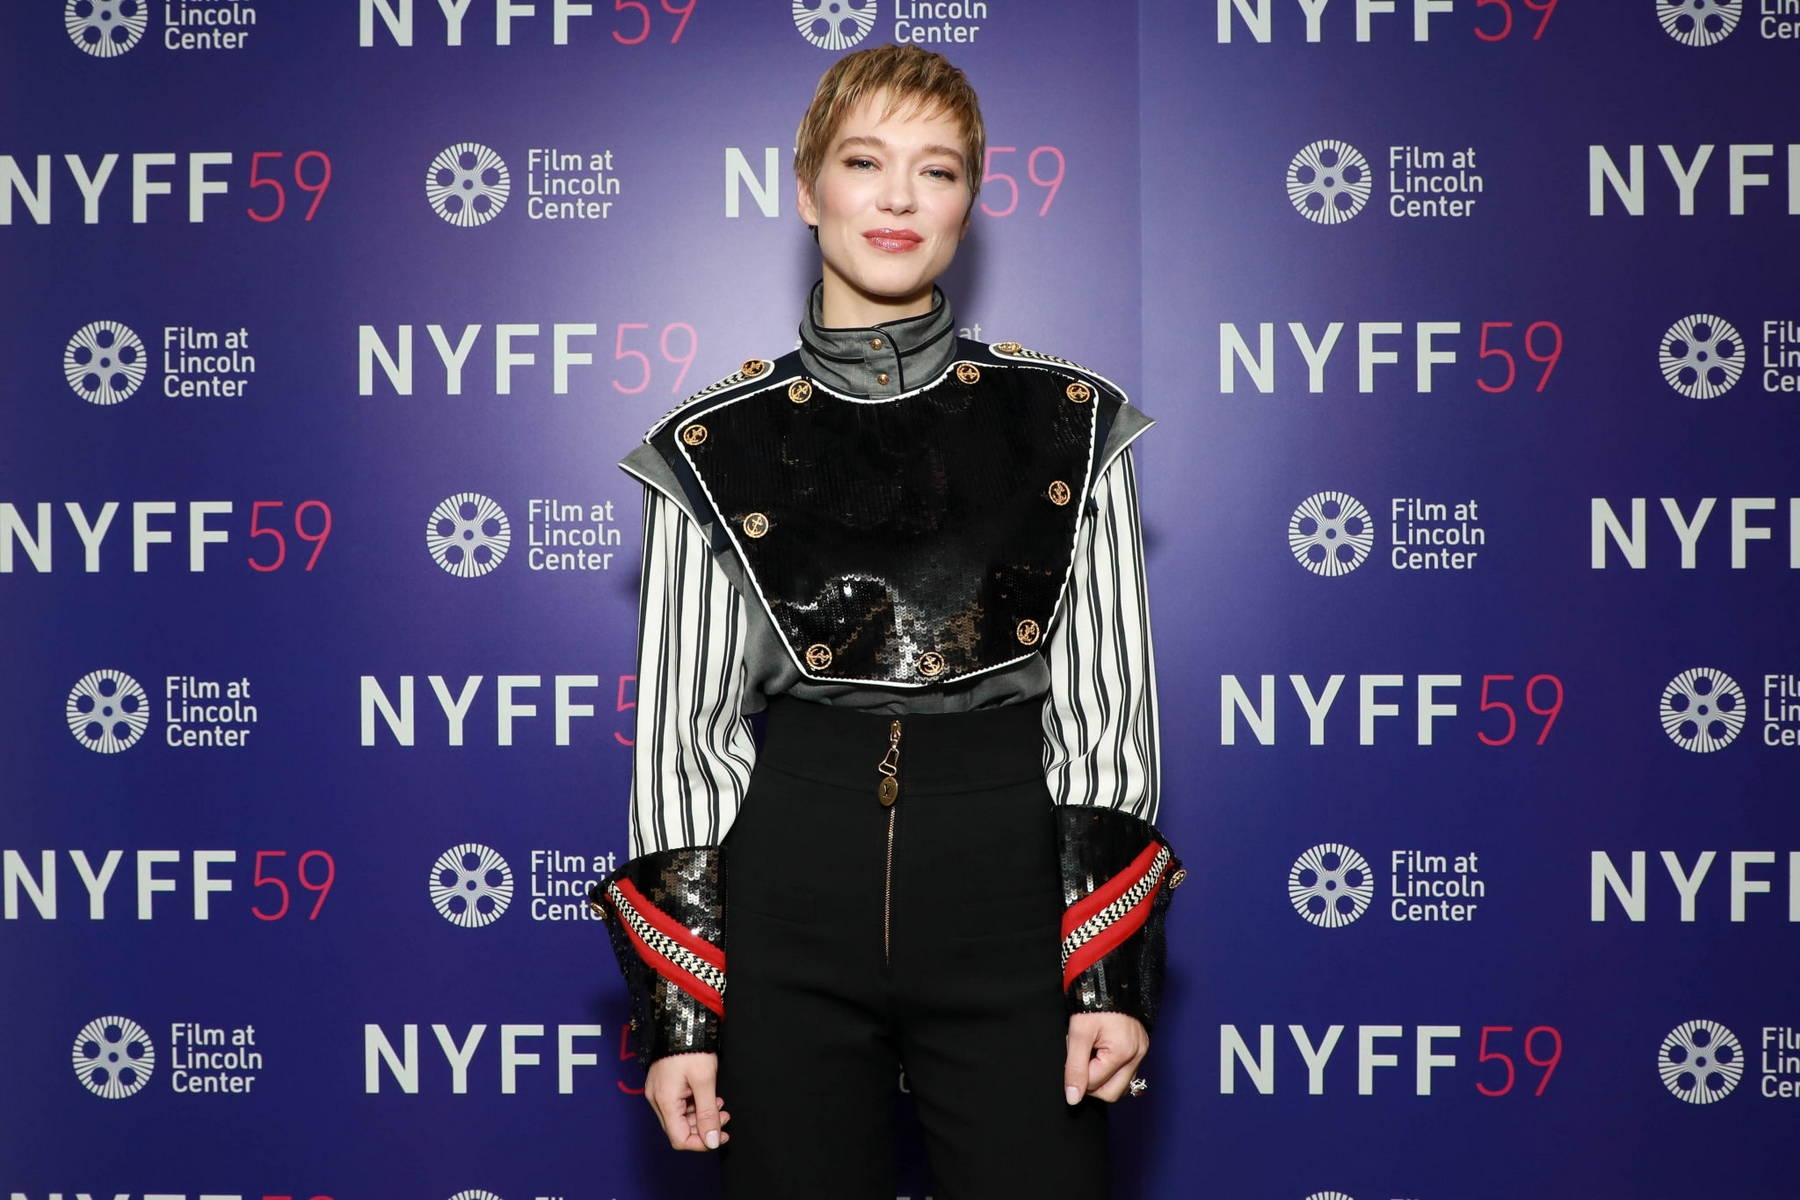 Bond girl Lea Seydoux debuts new light blonde pixie cut at The French  Dispatch screening in Paris